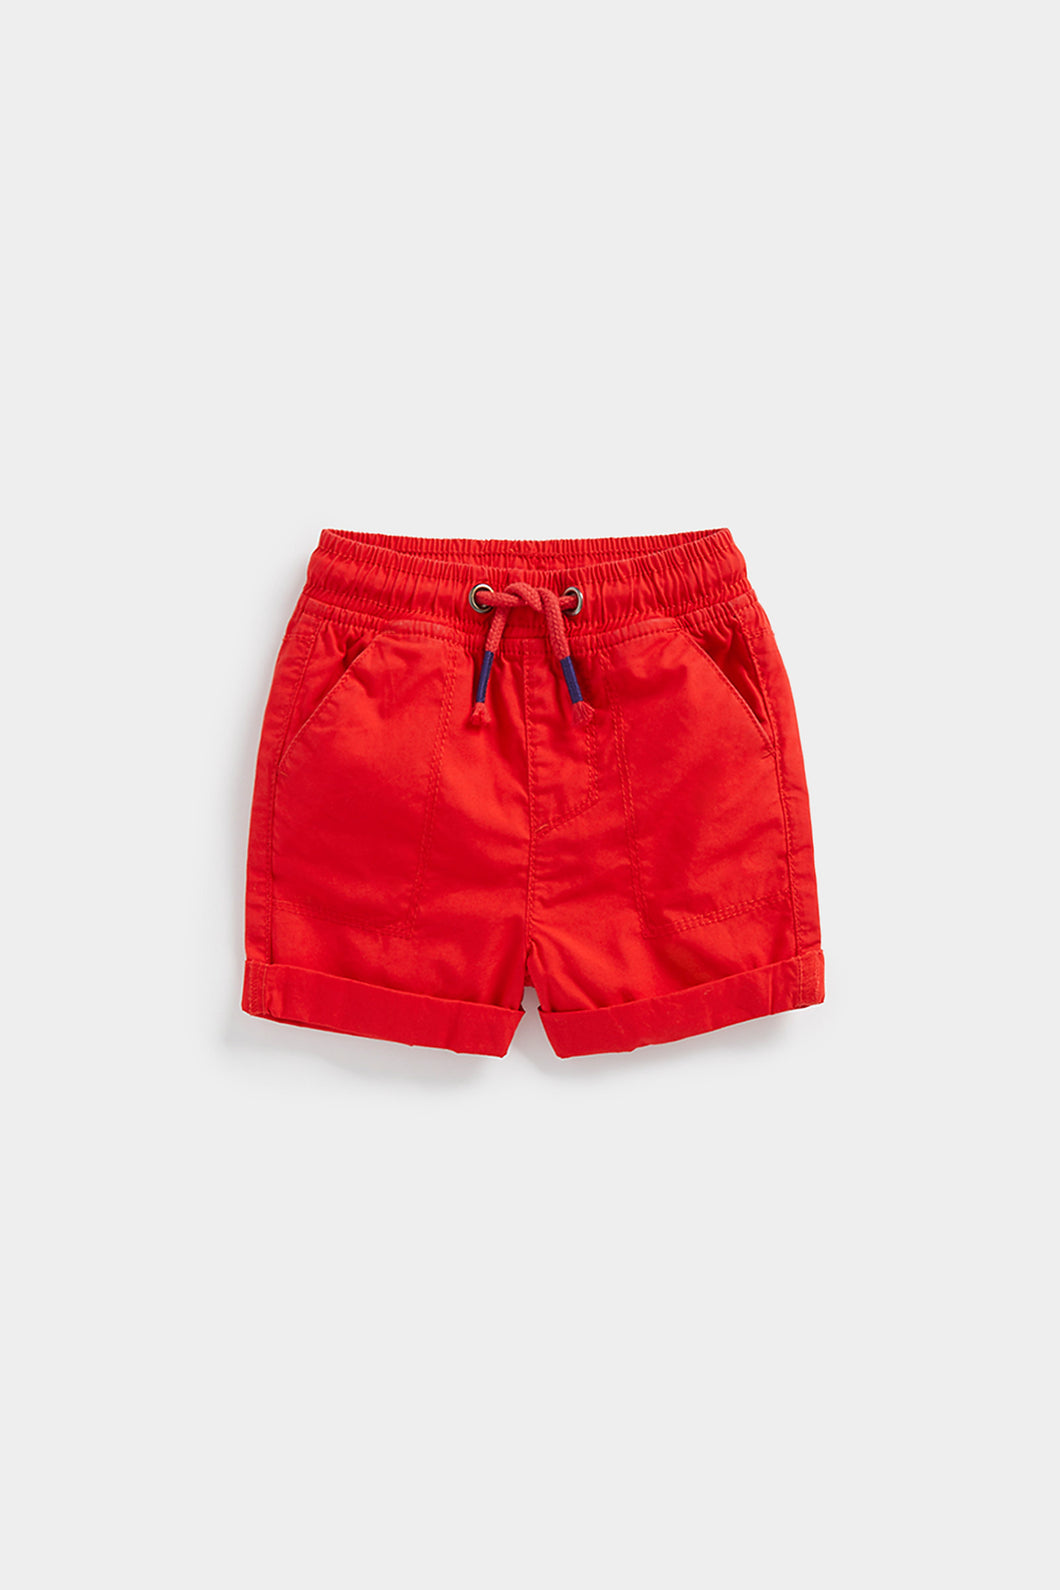 Mothercare Red Poplin Shorts